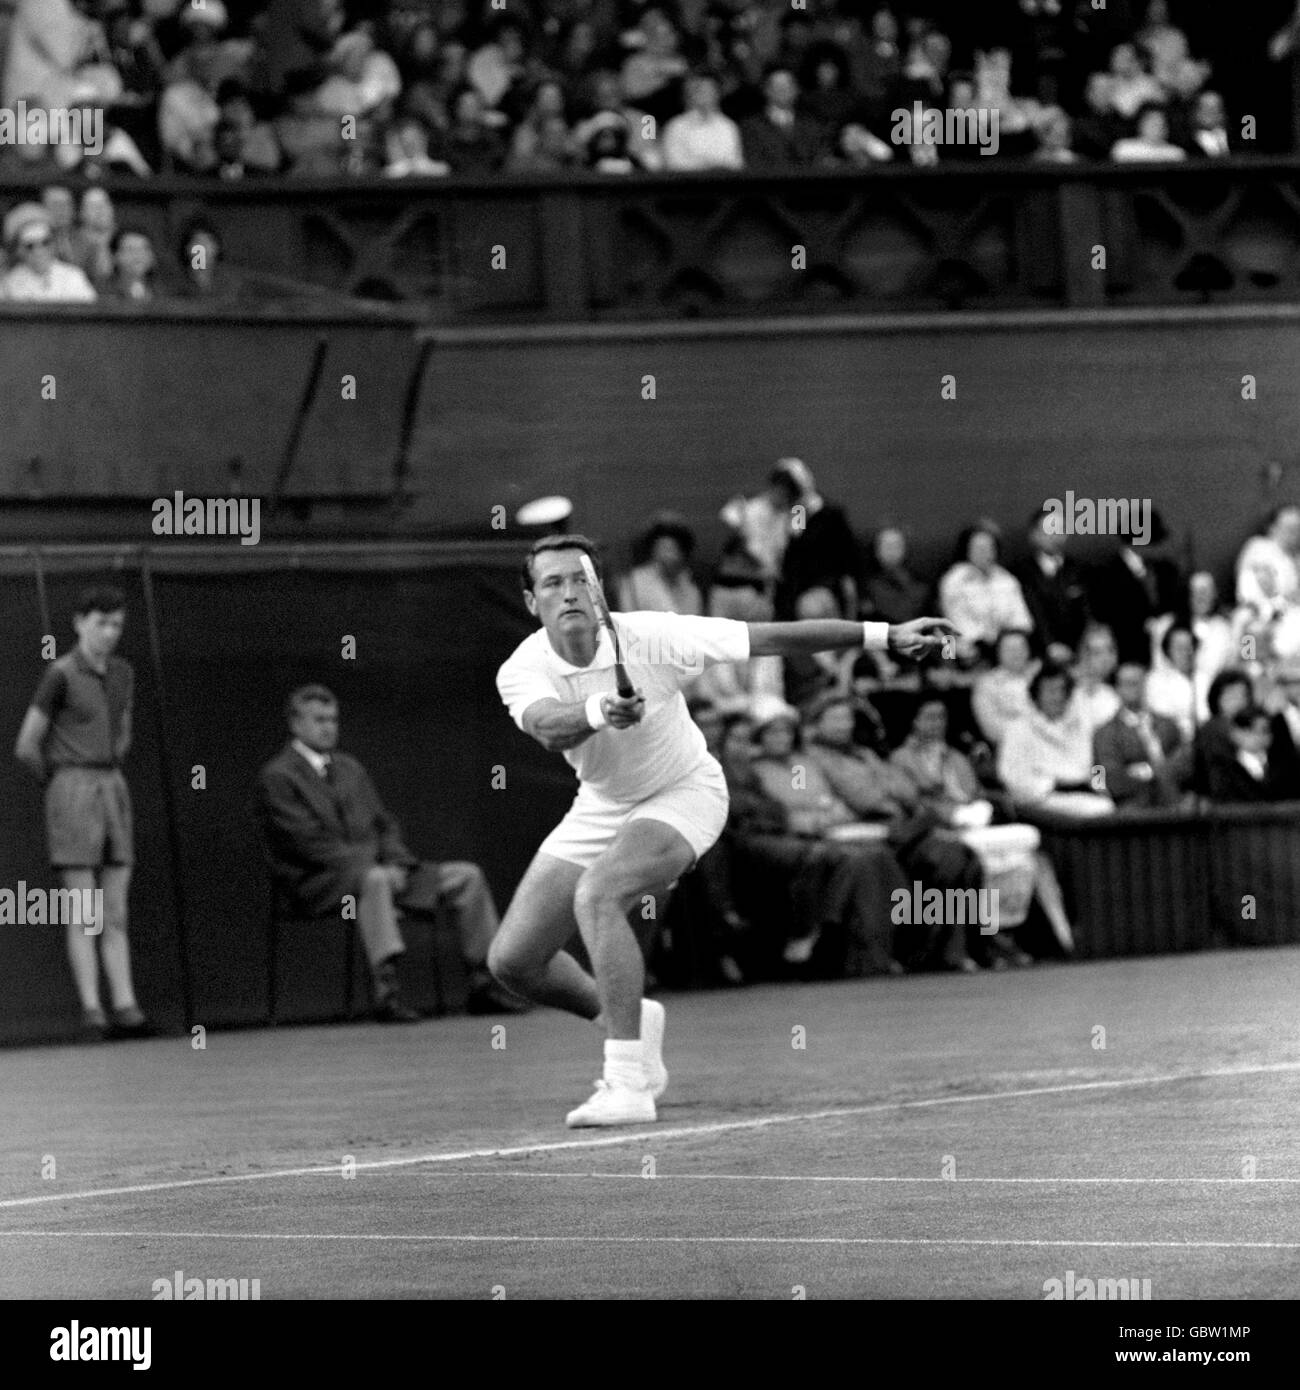 1965 tennis Black and White Stock Photos & Images - Alamy